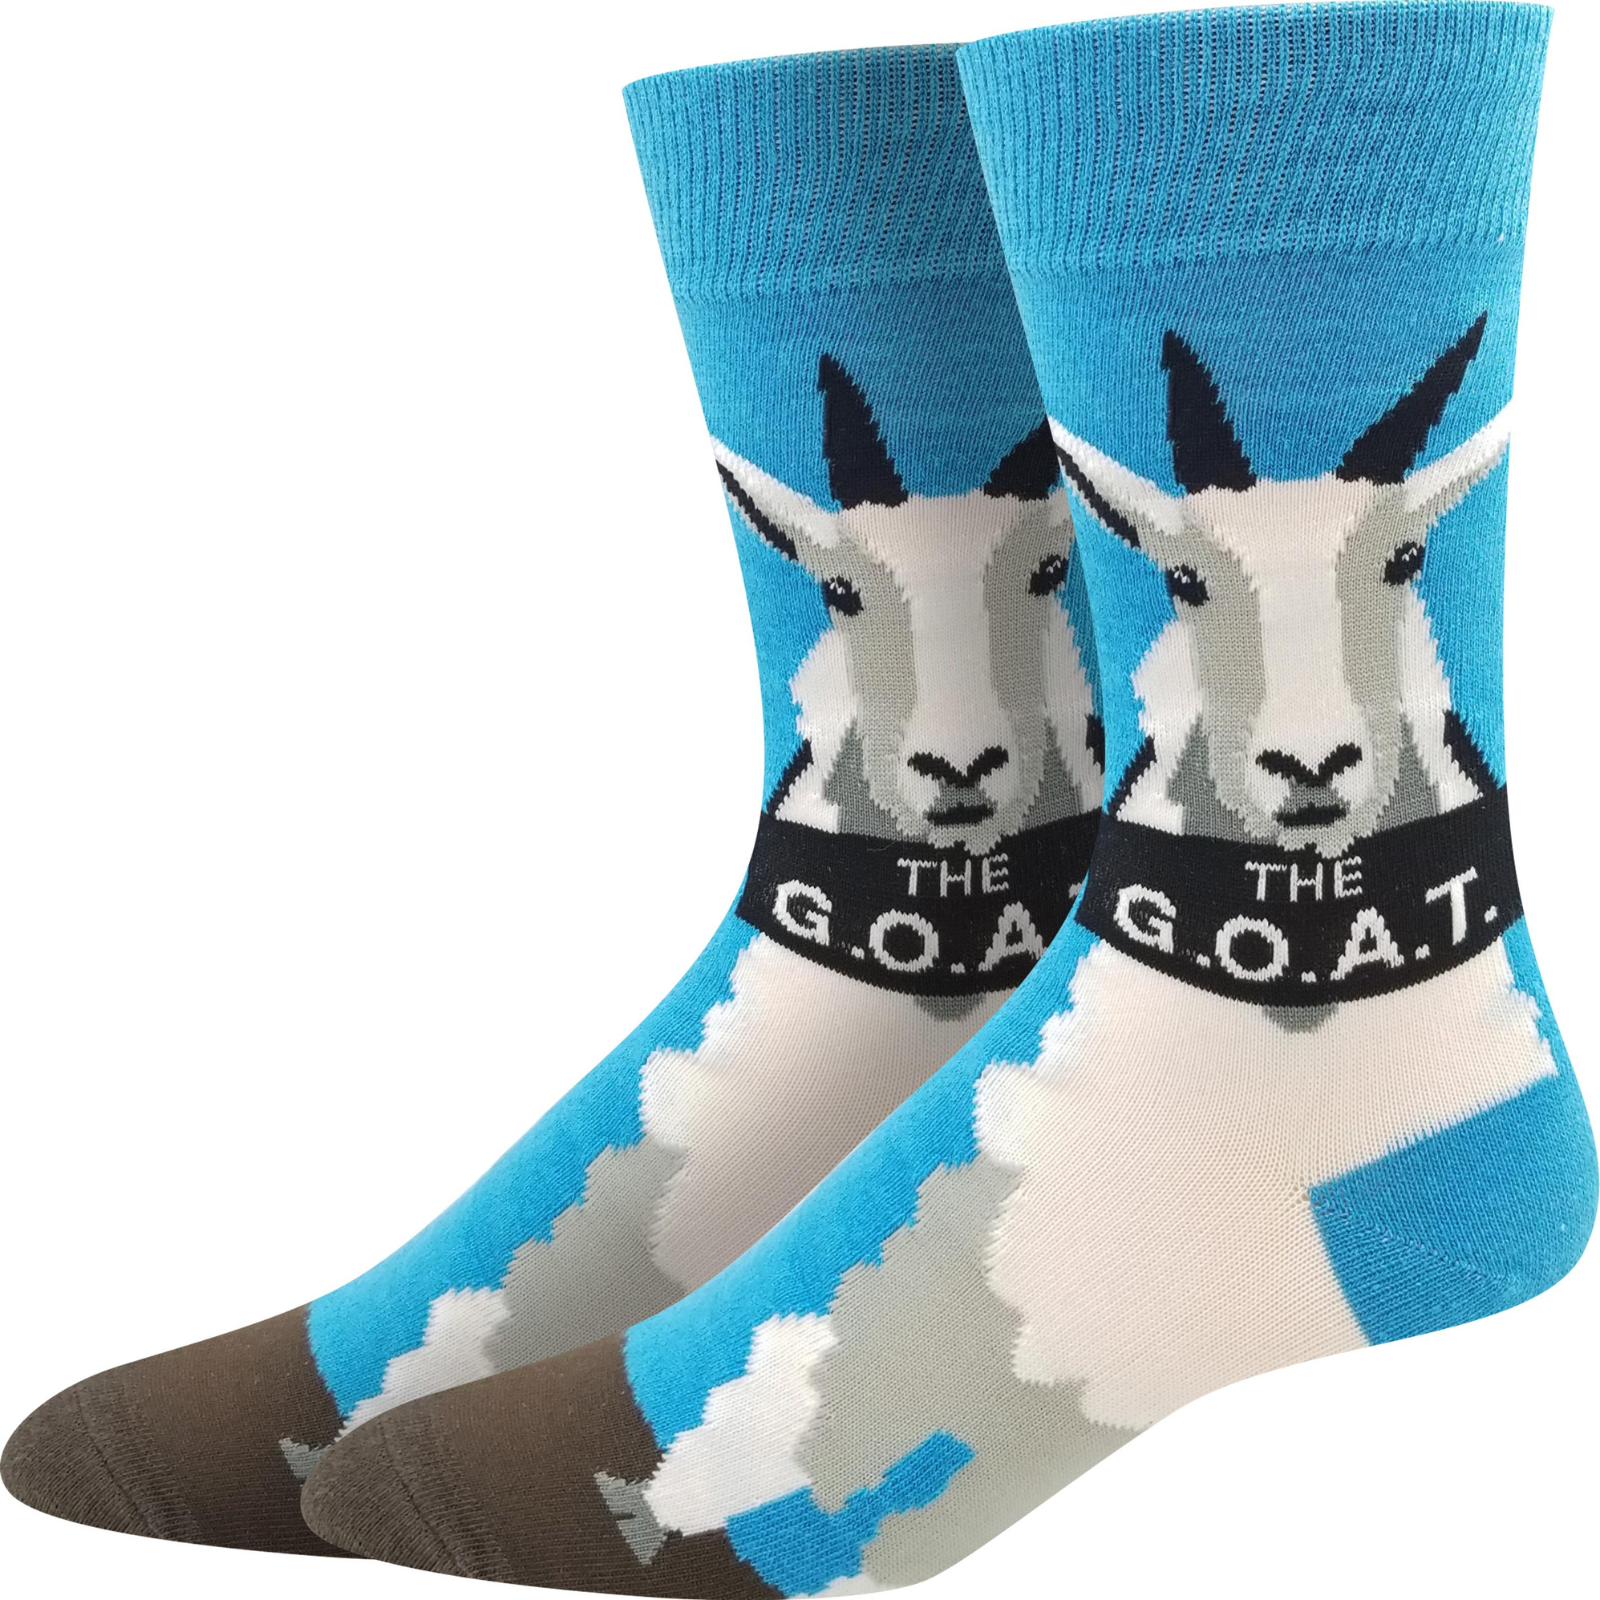 Sock Harbor Mountain G.O.A.T. men's sock featuring blue sock with white mountain goat and "The G.O.A.T." written on it shown on display feet